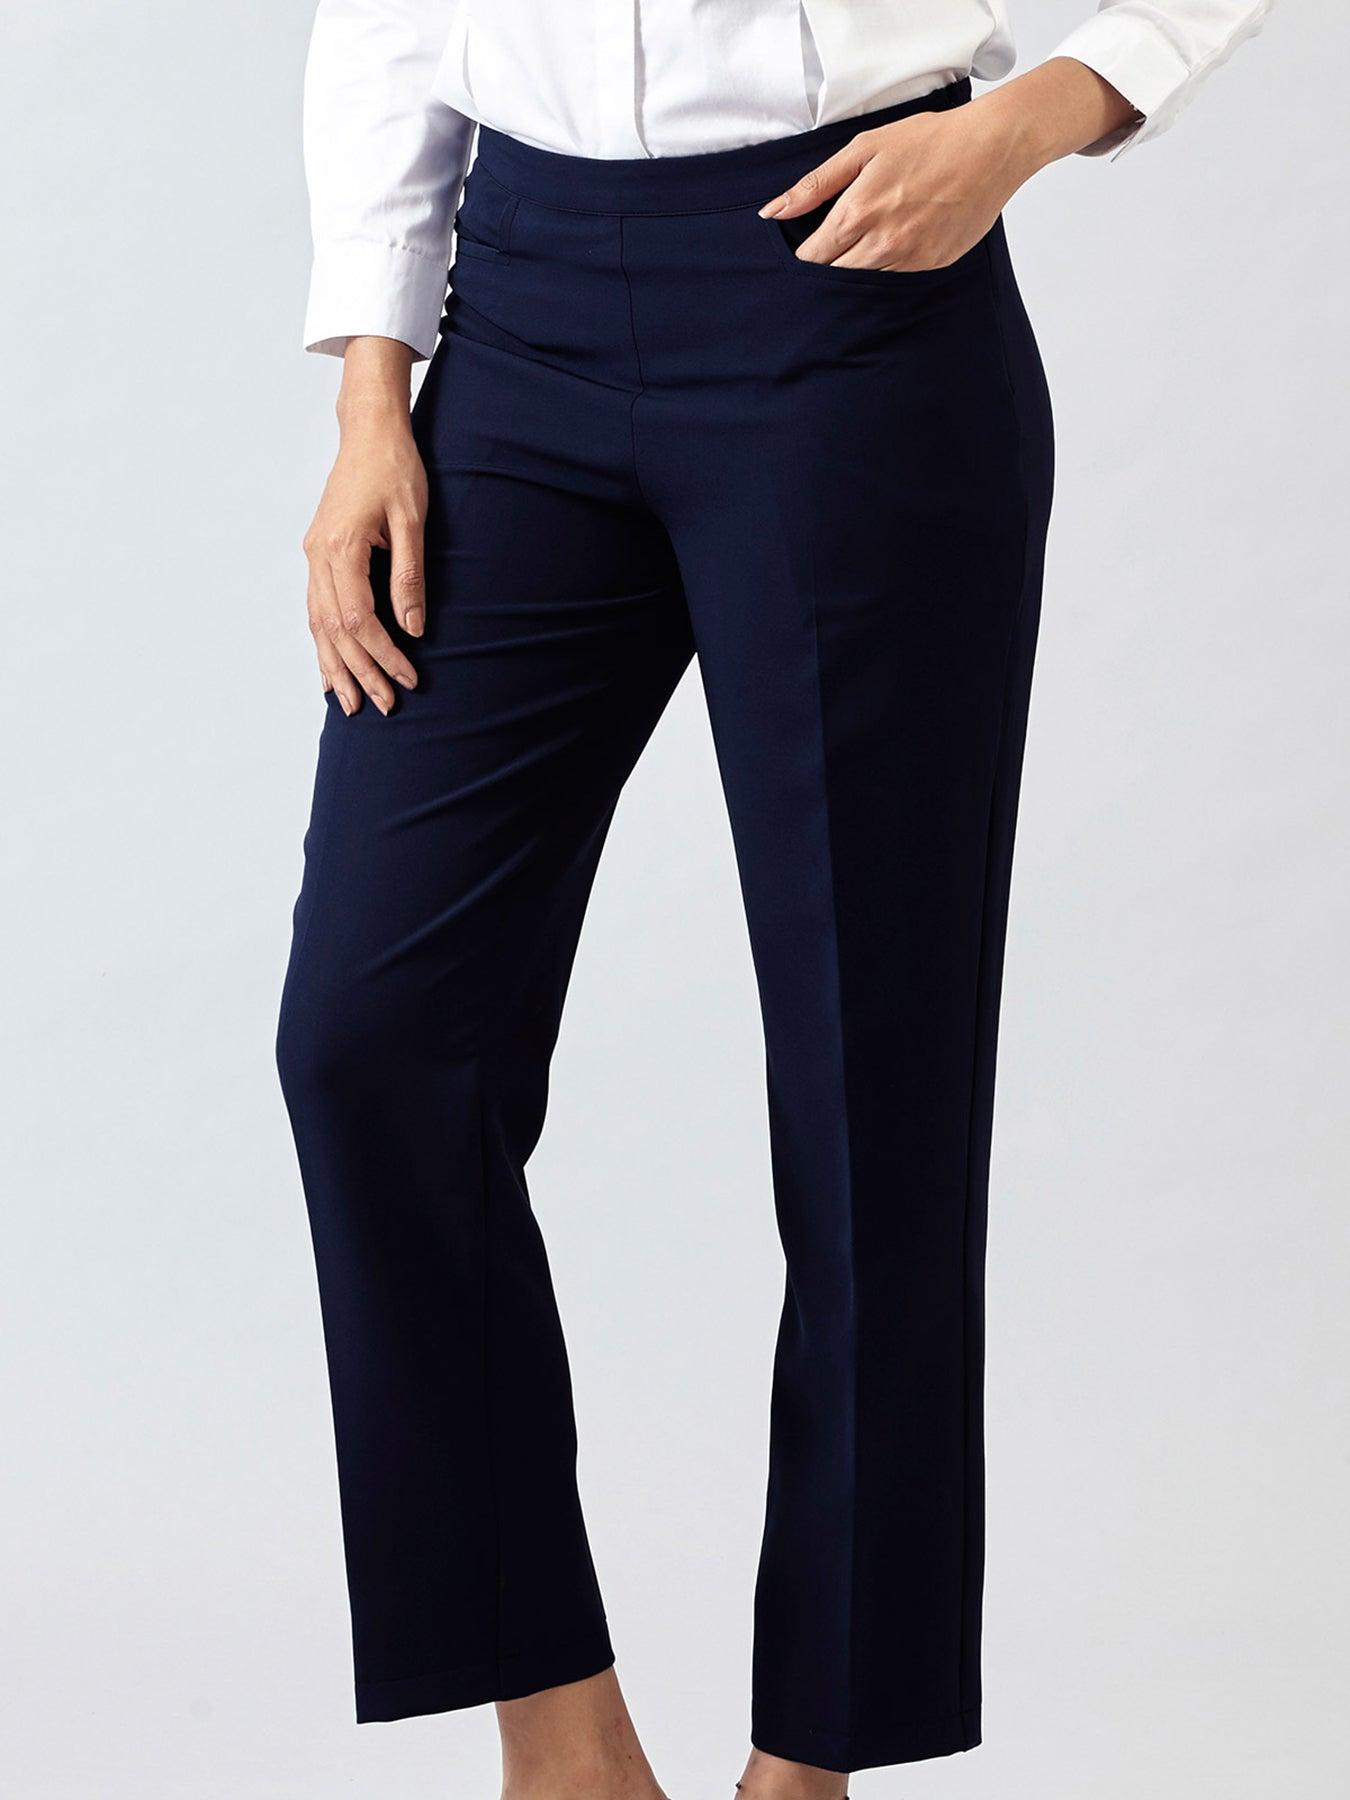 Essential Work Trousers- Navy| Formal Trousers